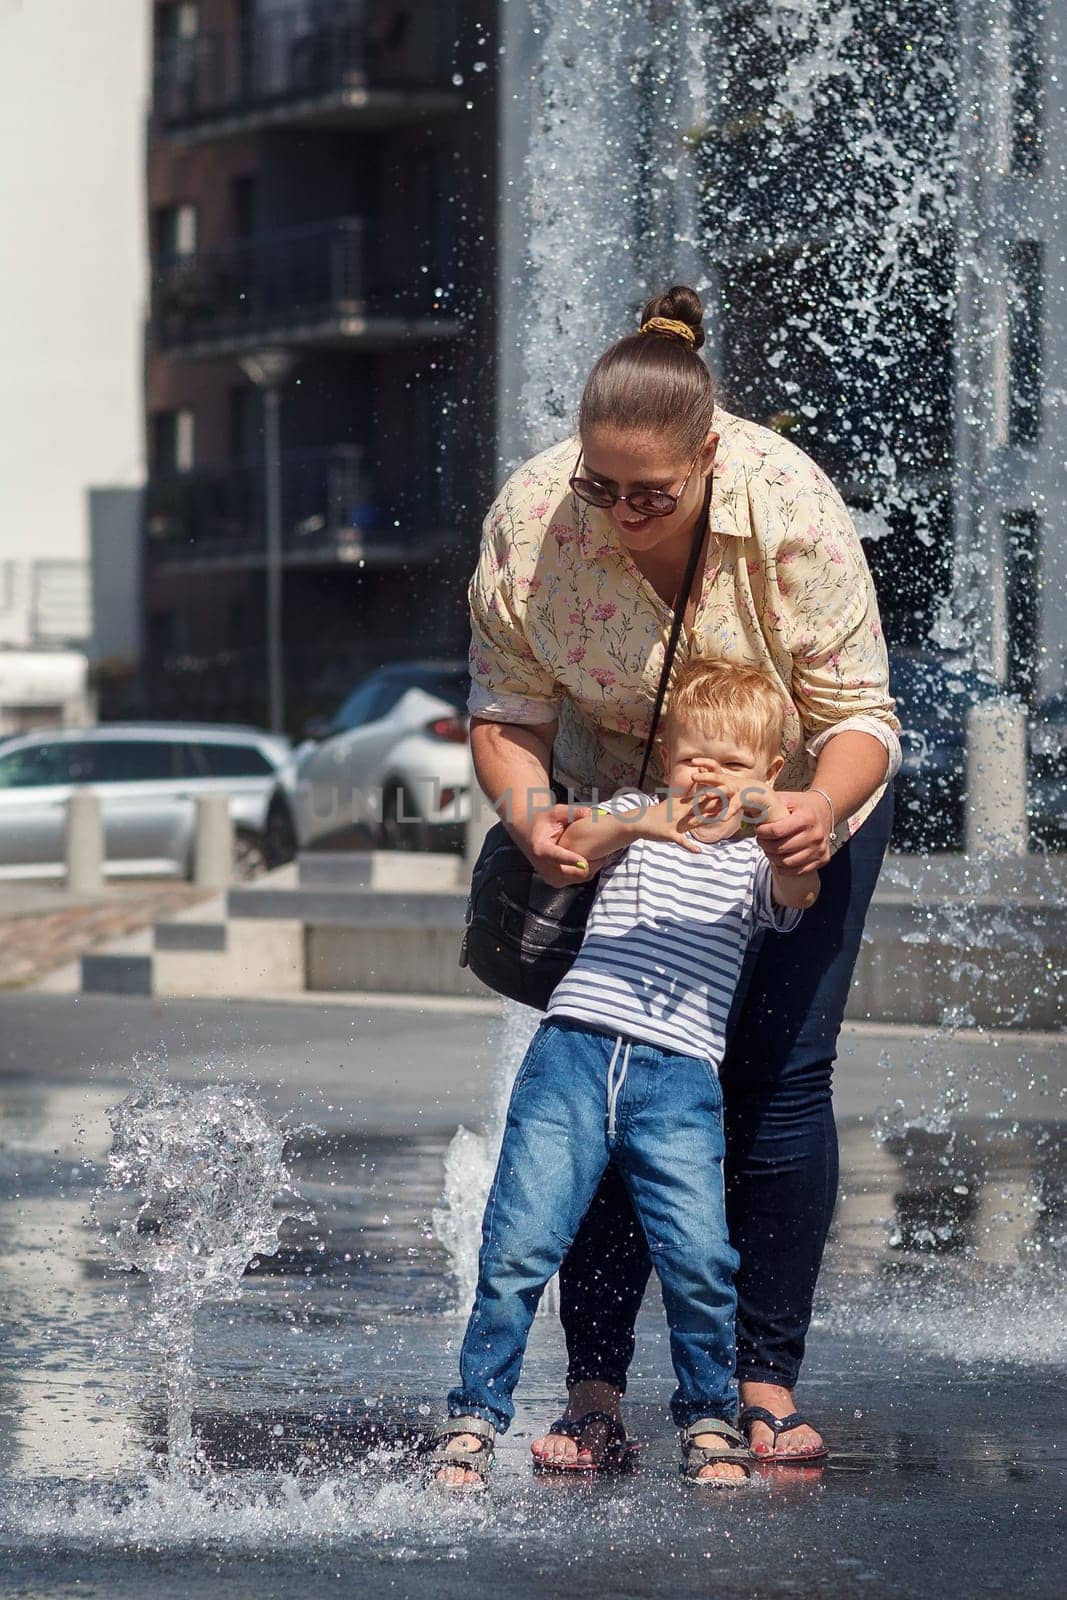 Mom with her son in the city by the water fountain. The little child is frightened by the sudden jets of water. by Lincikas